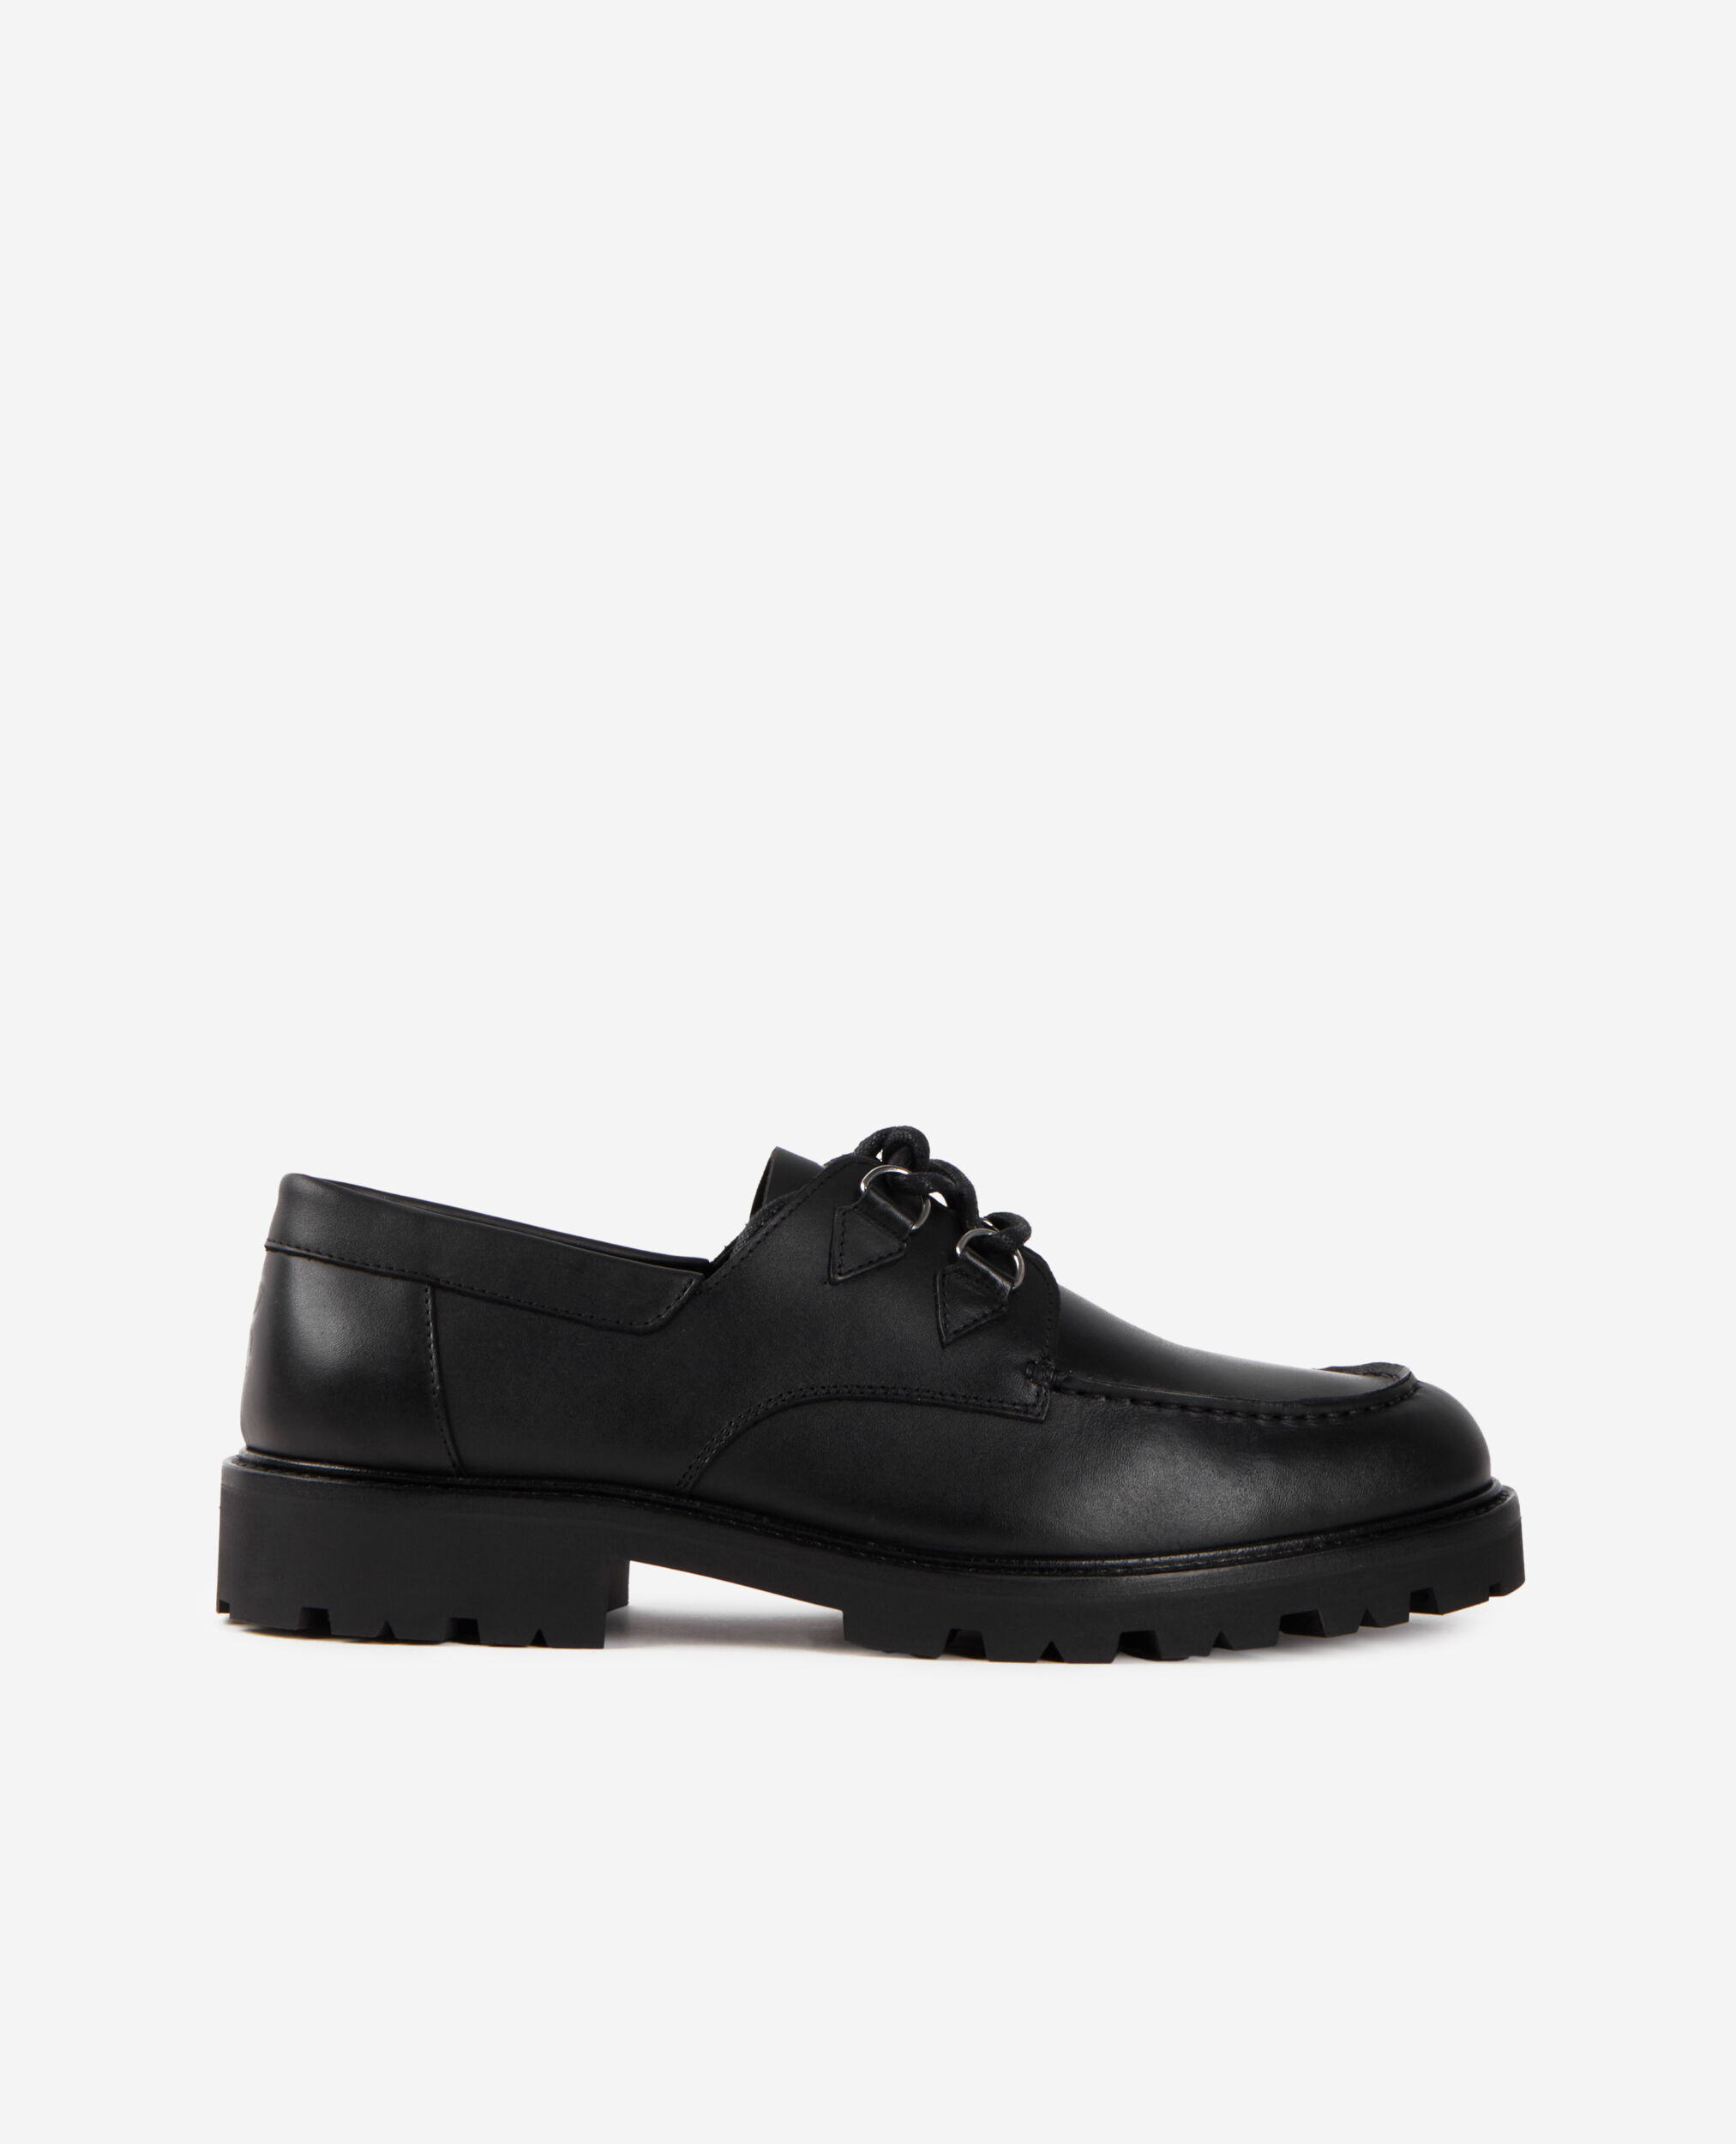 Black leather derbies with laces, BLACK, hi-res image number null